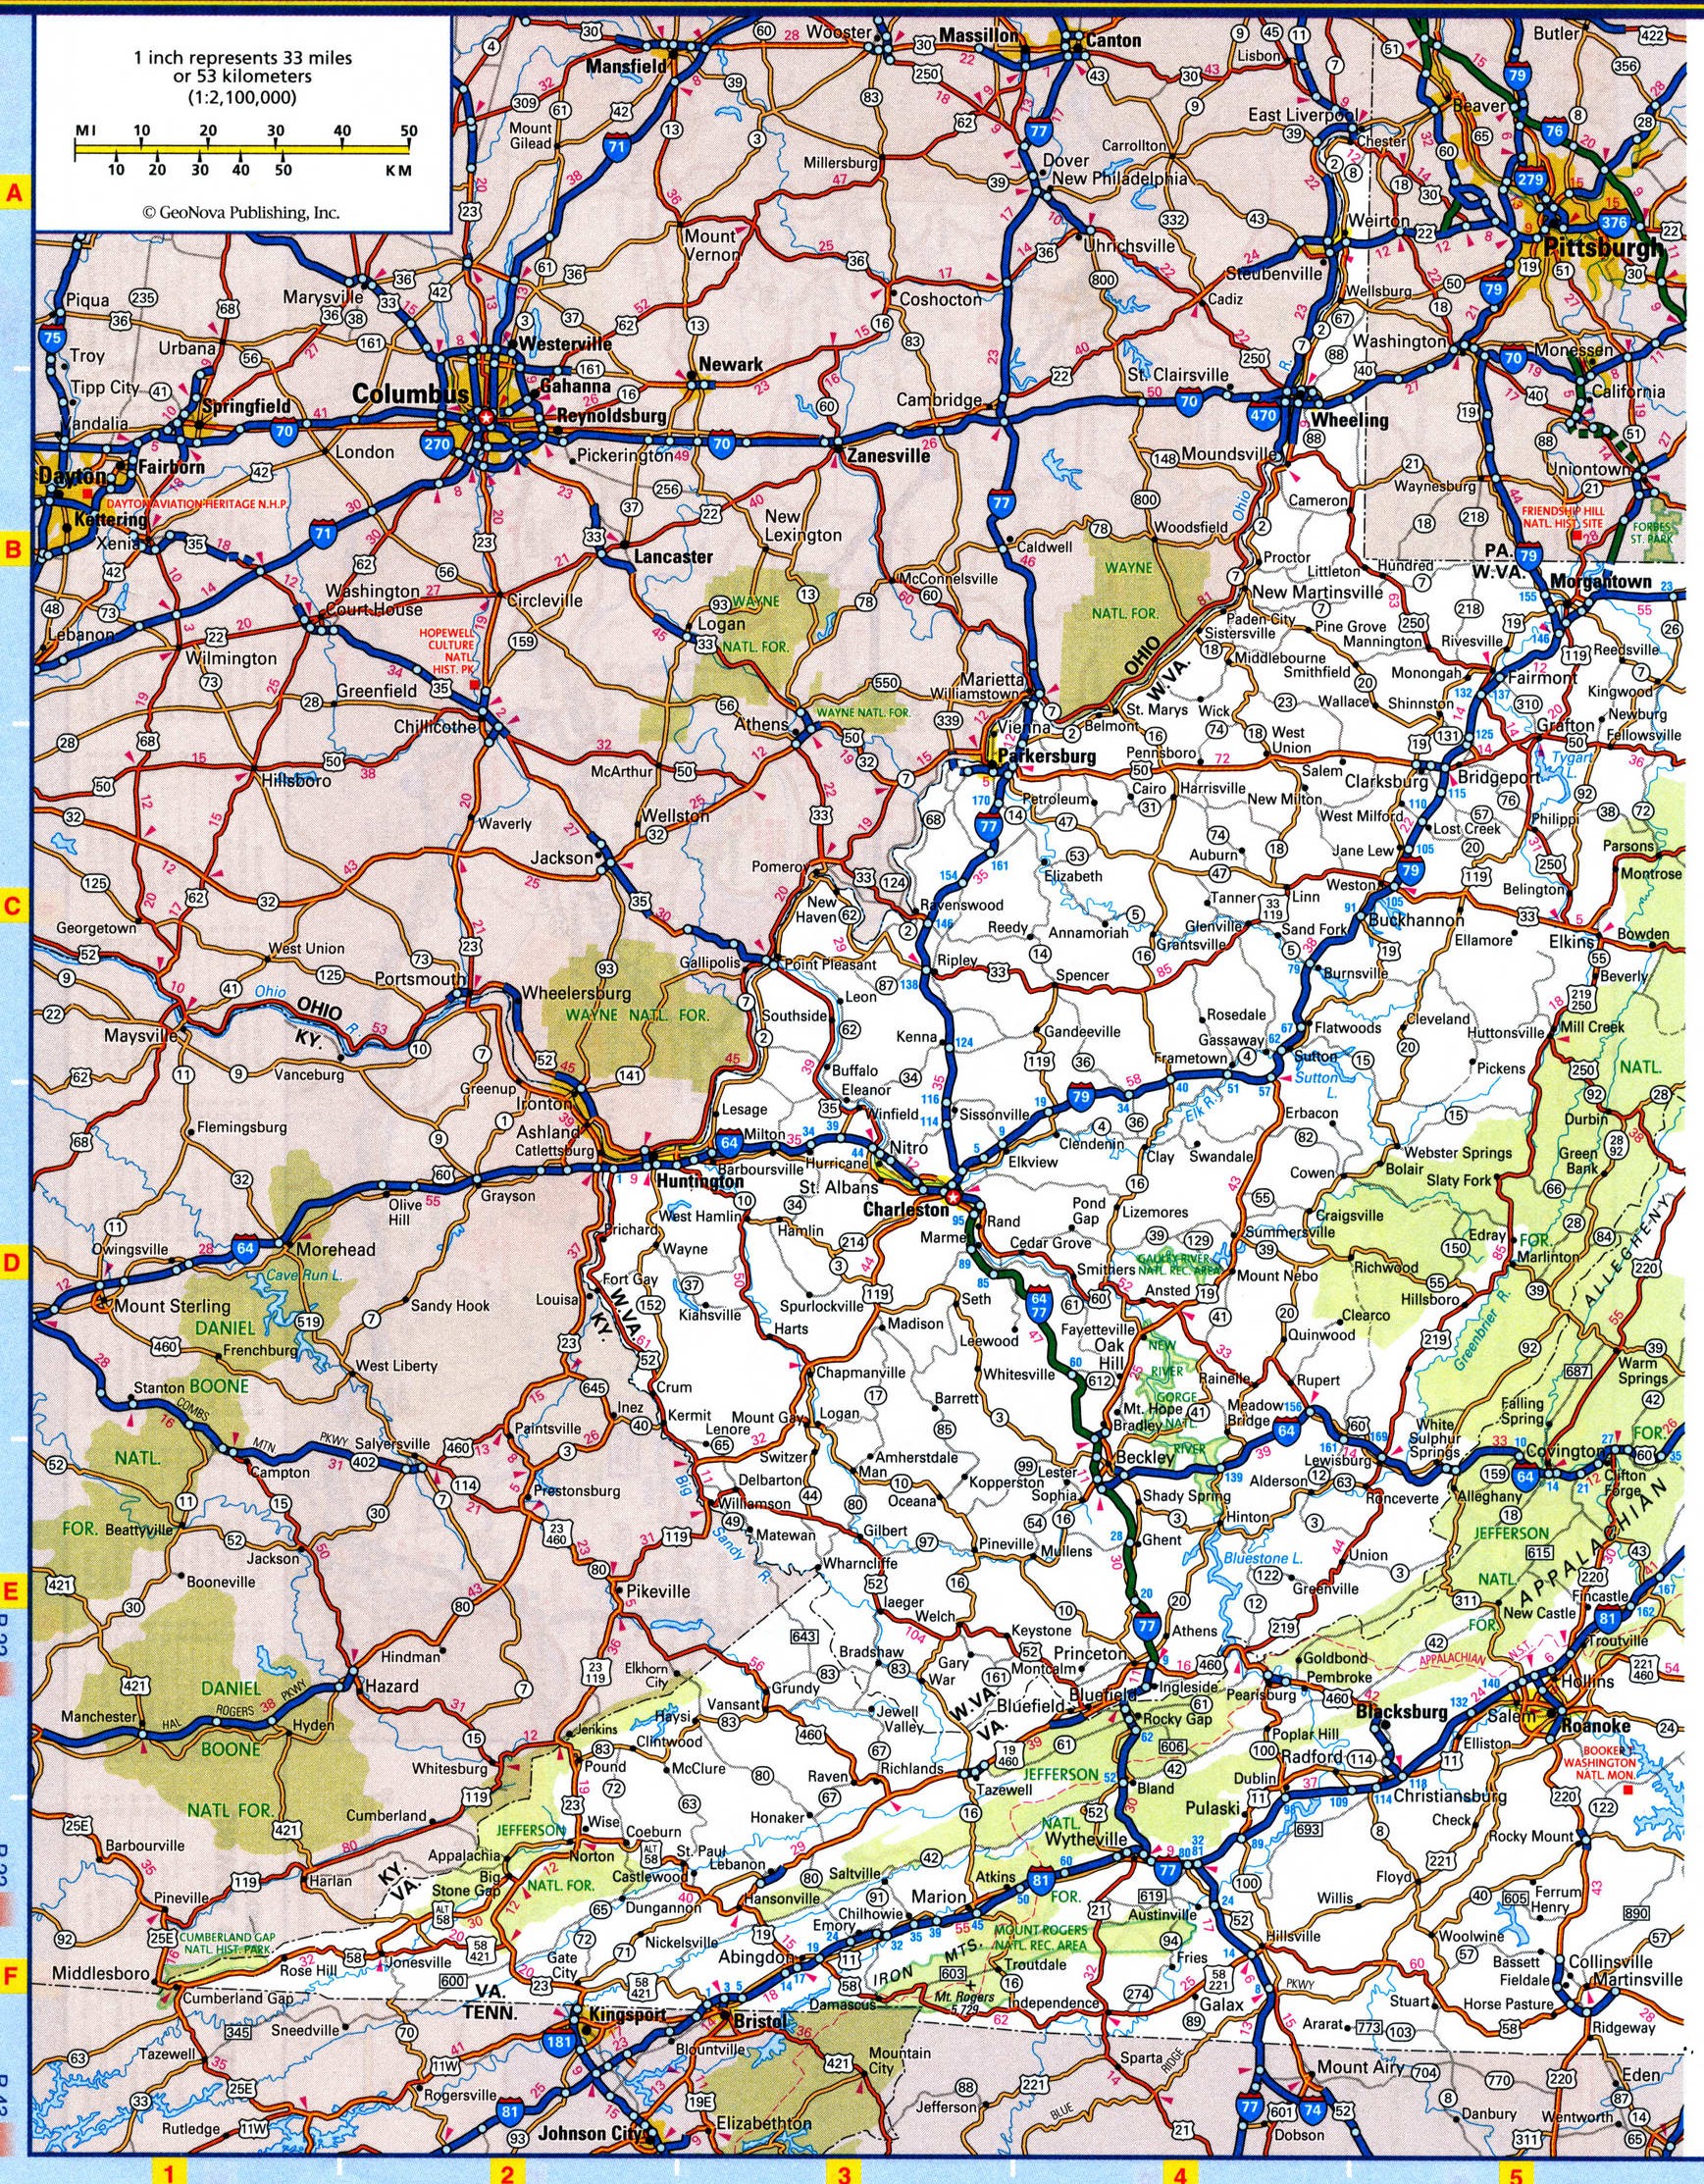 maps-of-west-virginia-state-with-highways-roads-cities-counties